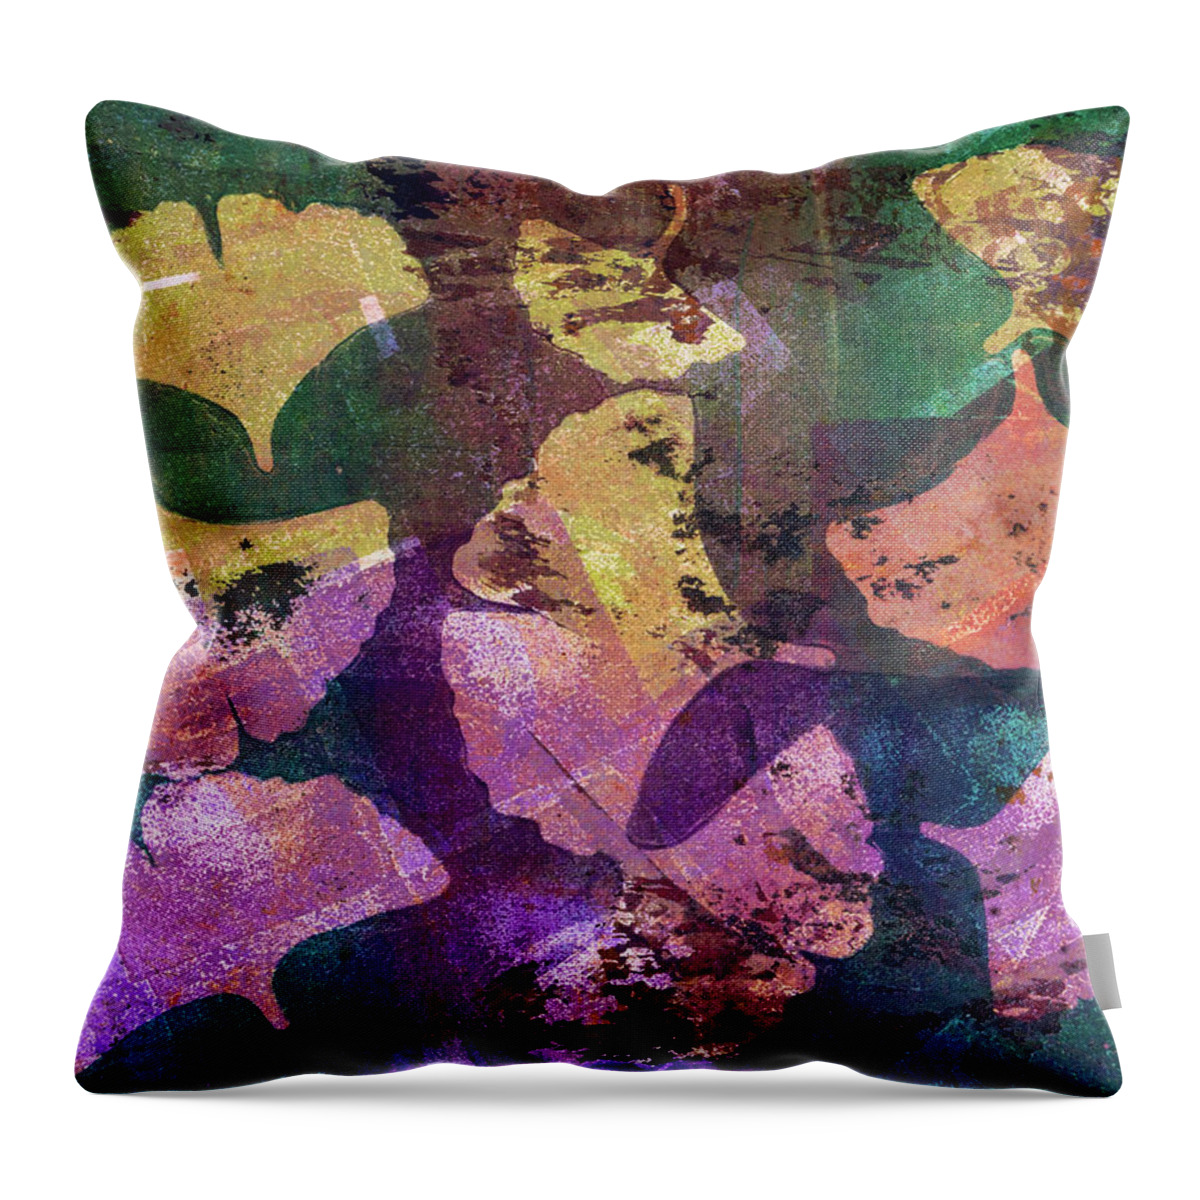 Aged Throw Pillow featuring the painting 41 by Joye Ardyn Durham